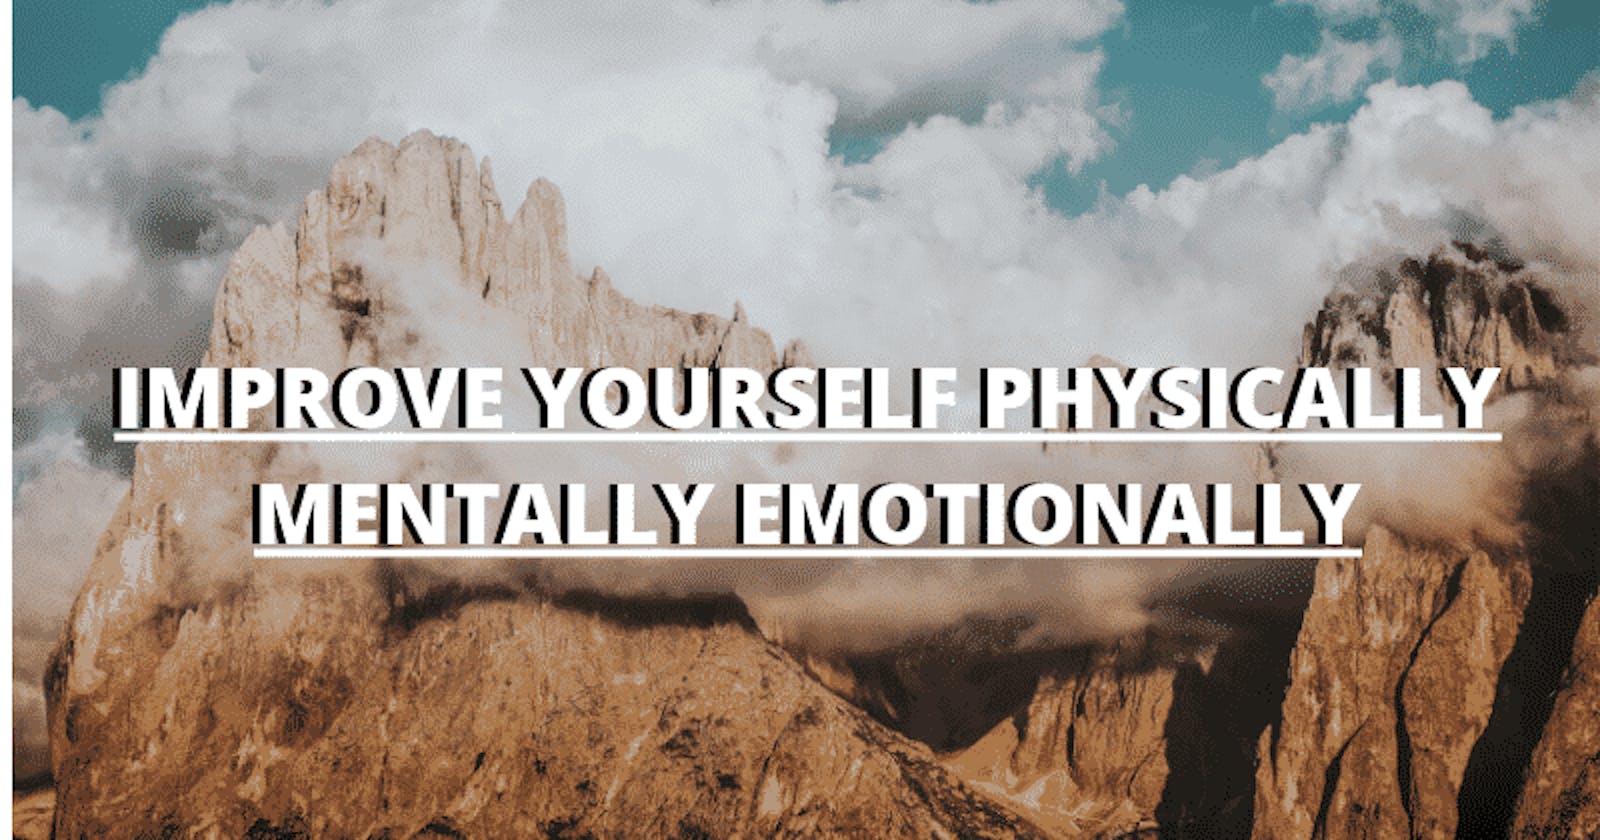 How to maintain yourself by Physically, Emotionally and Spiritually?